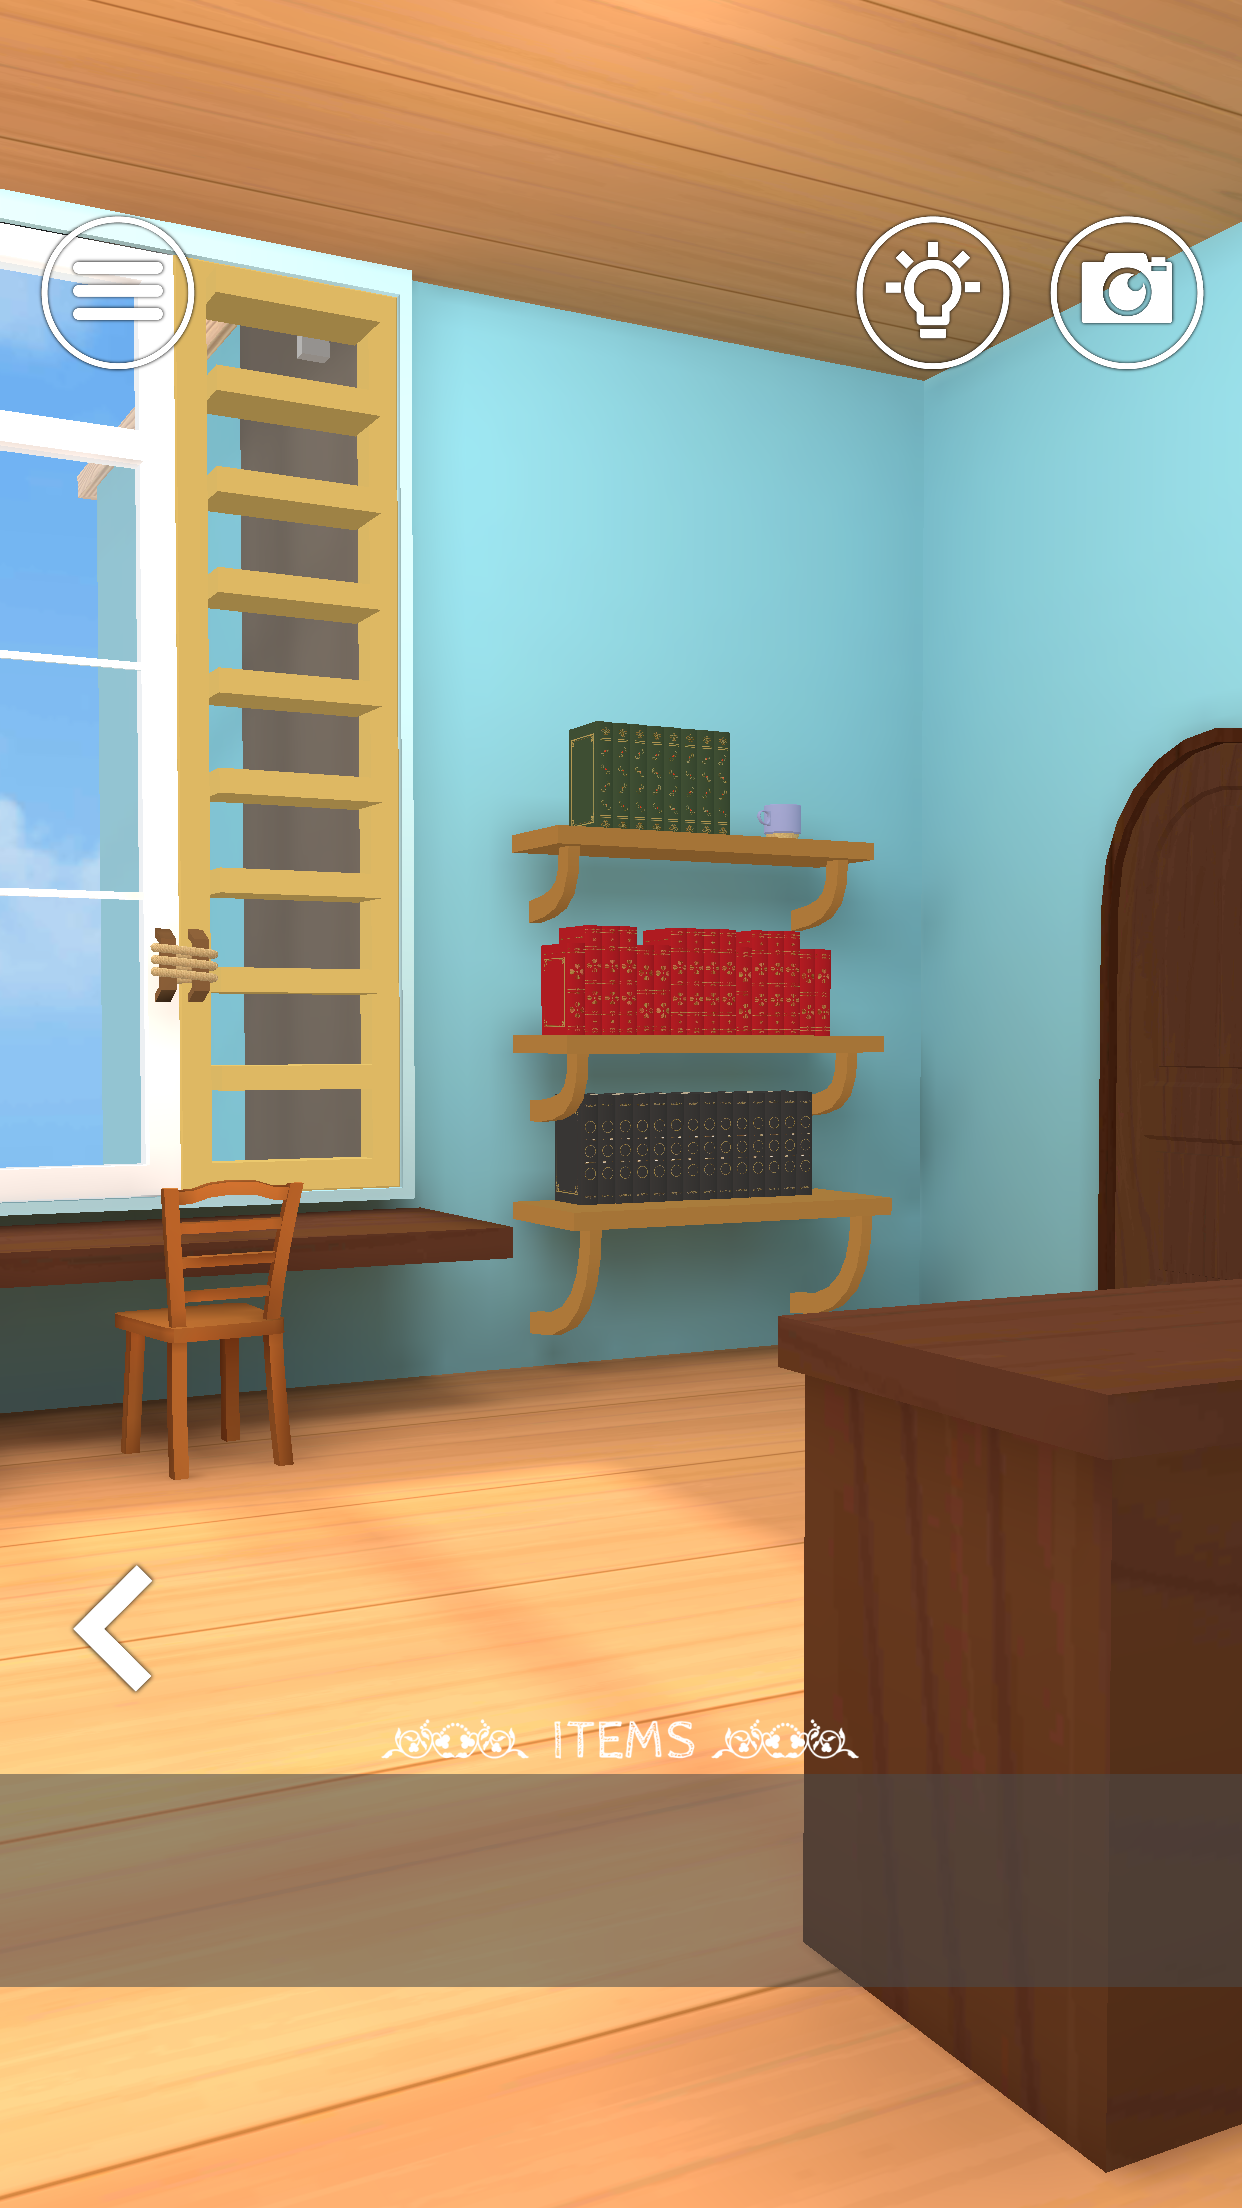 Screenshot of Tiny Room Collection